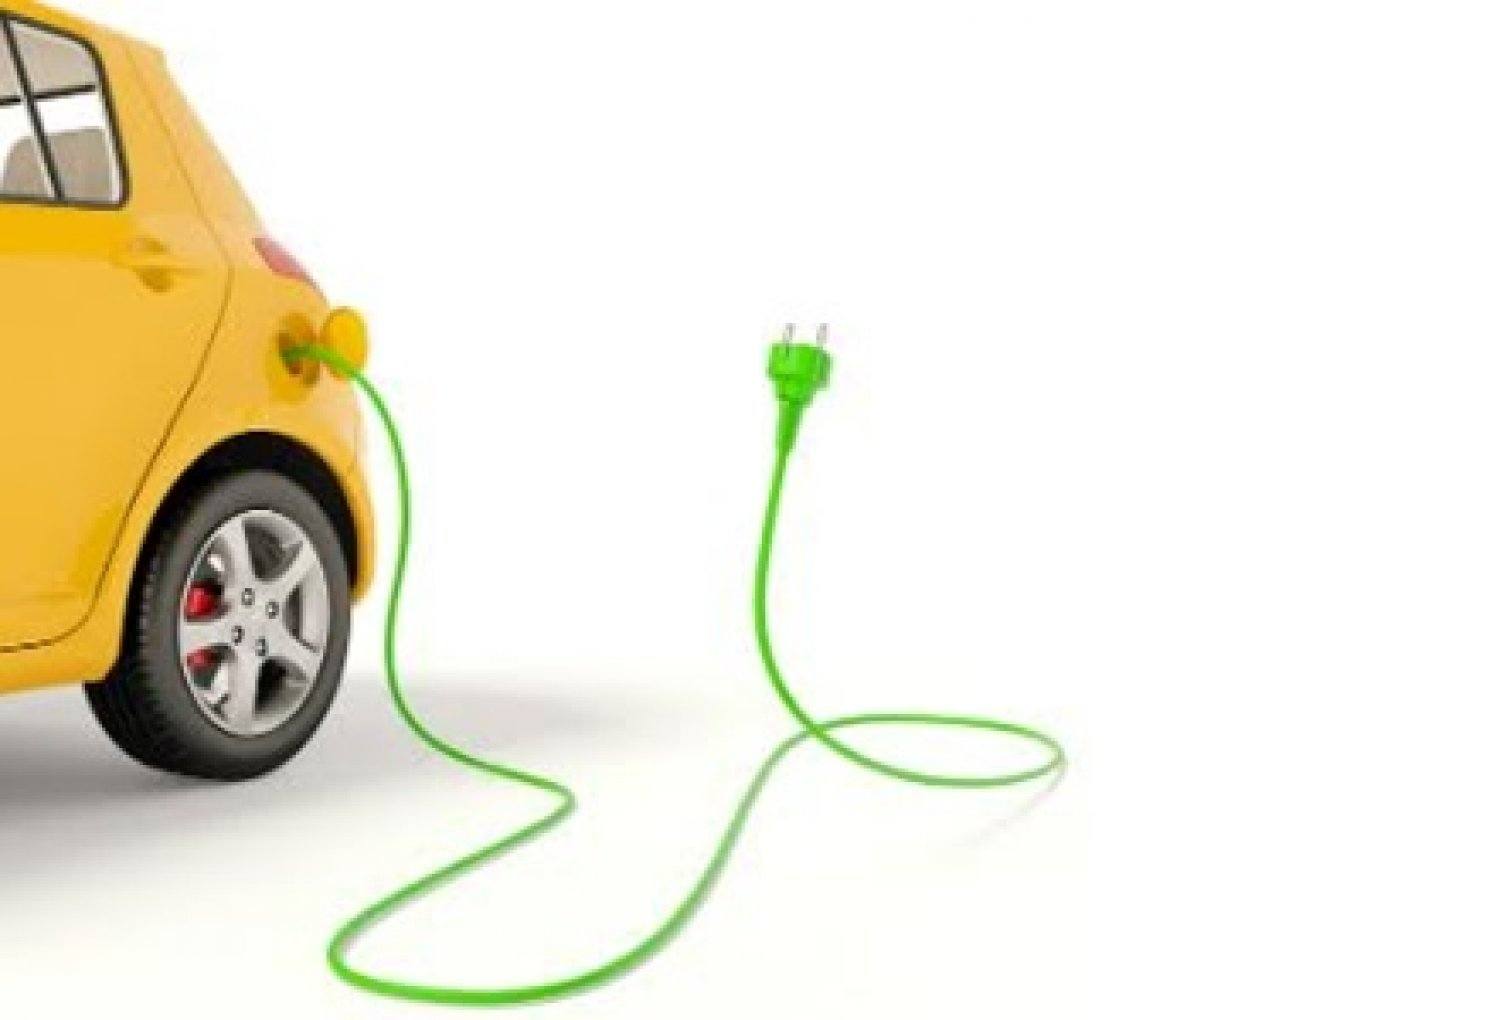 No need to plug it - the Electric Car sells itself